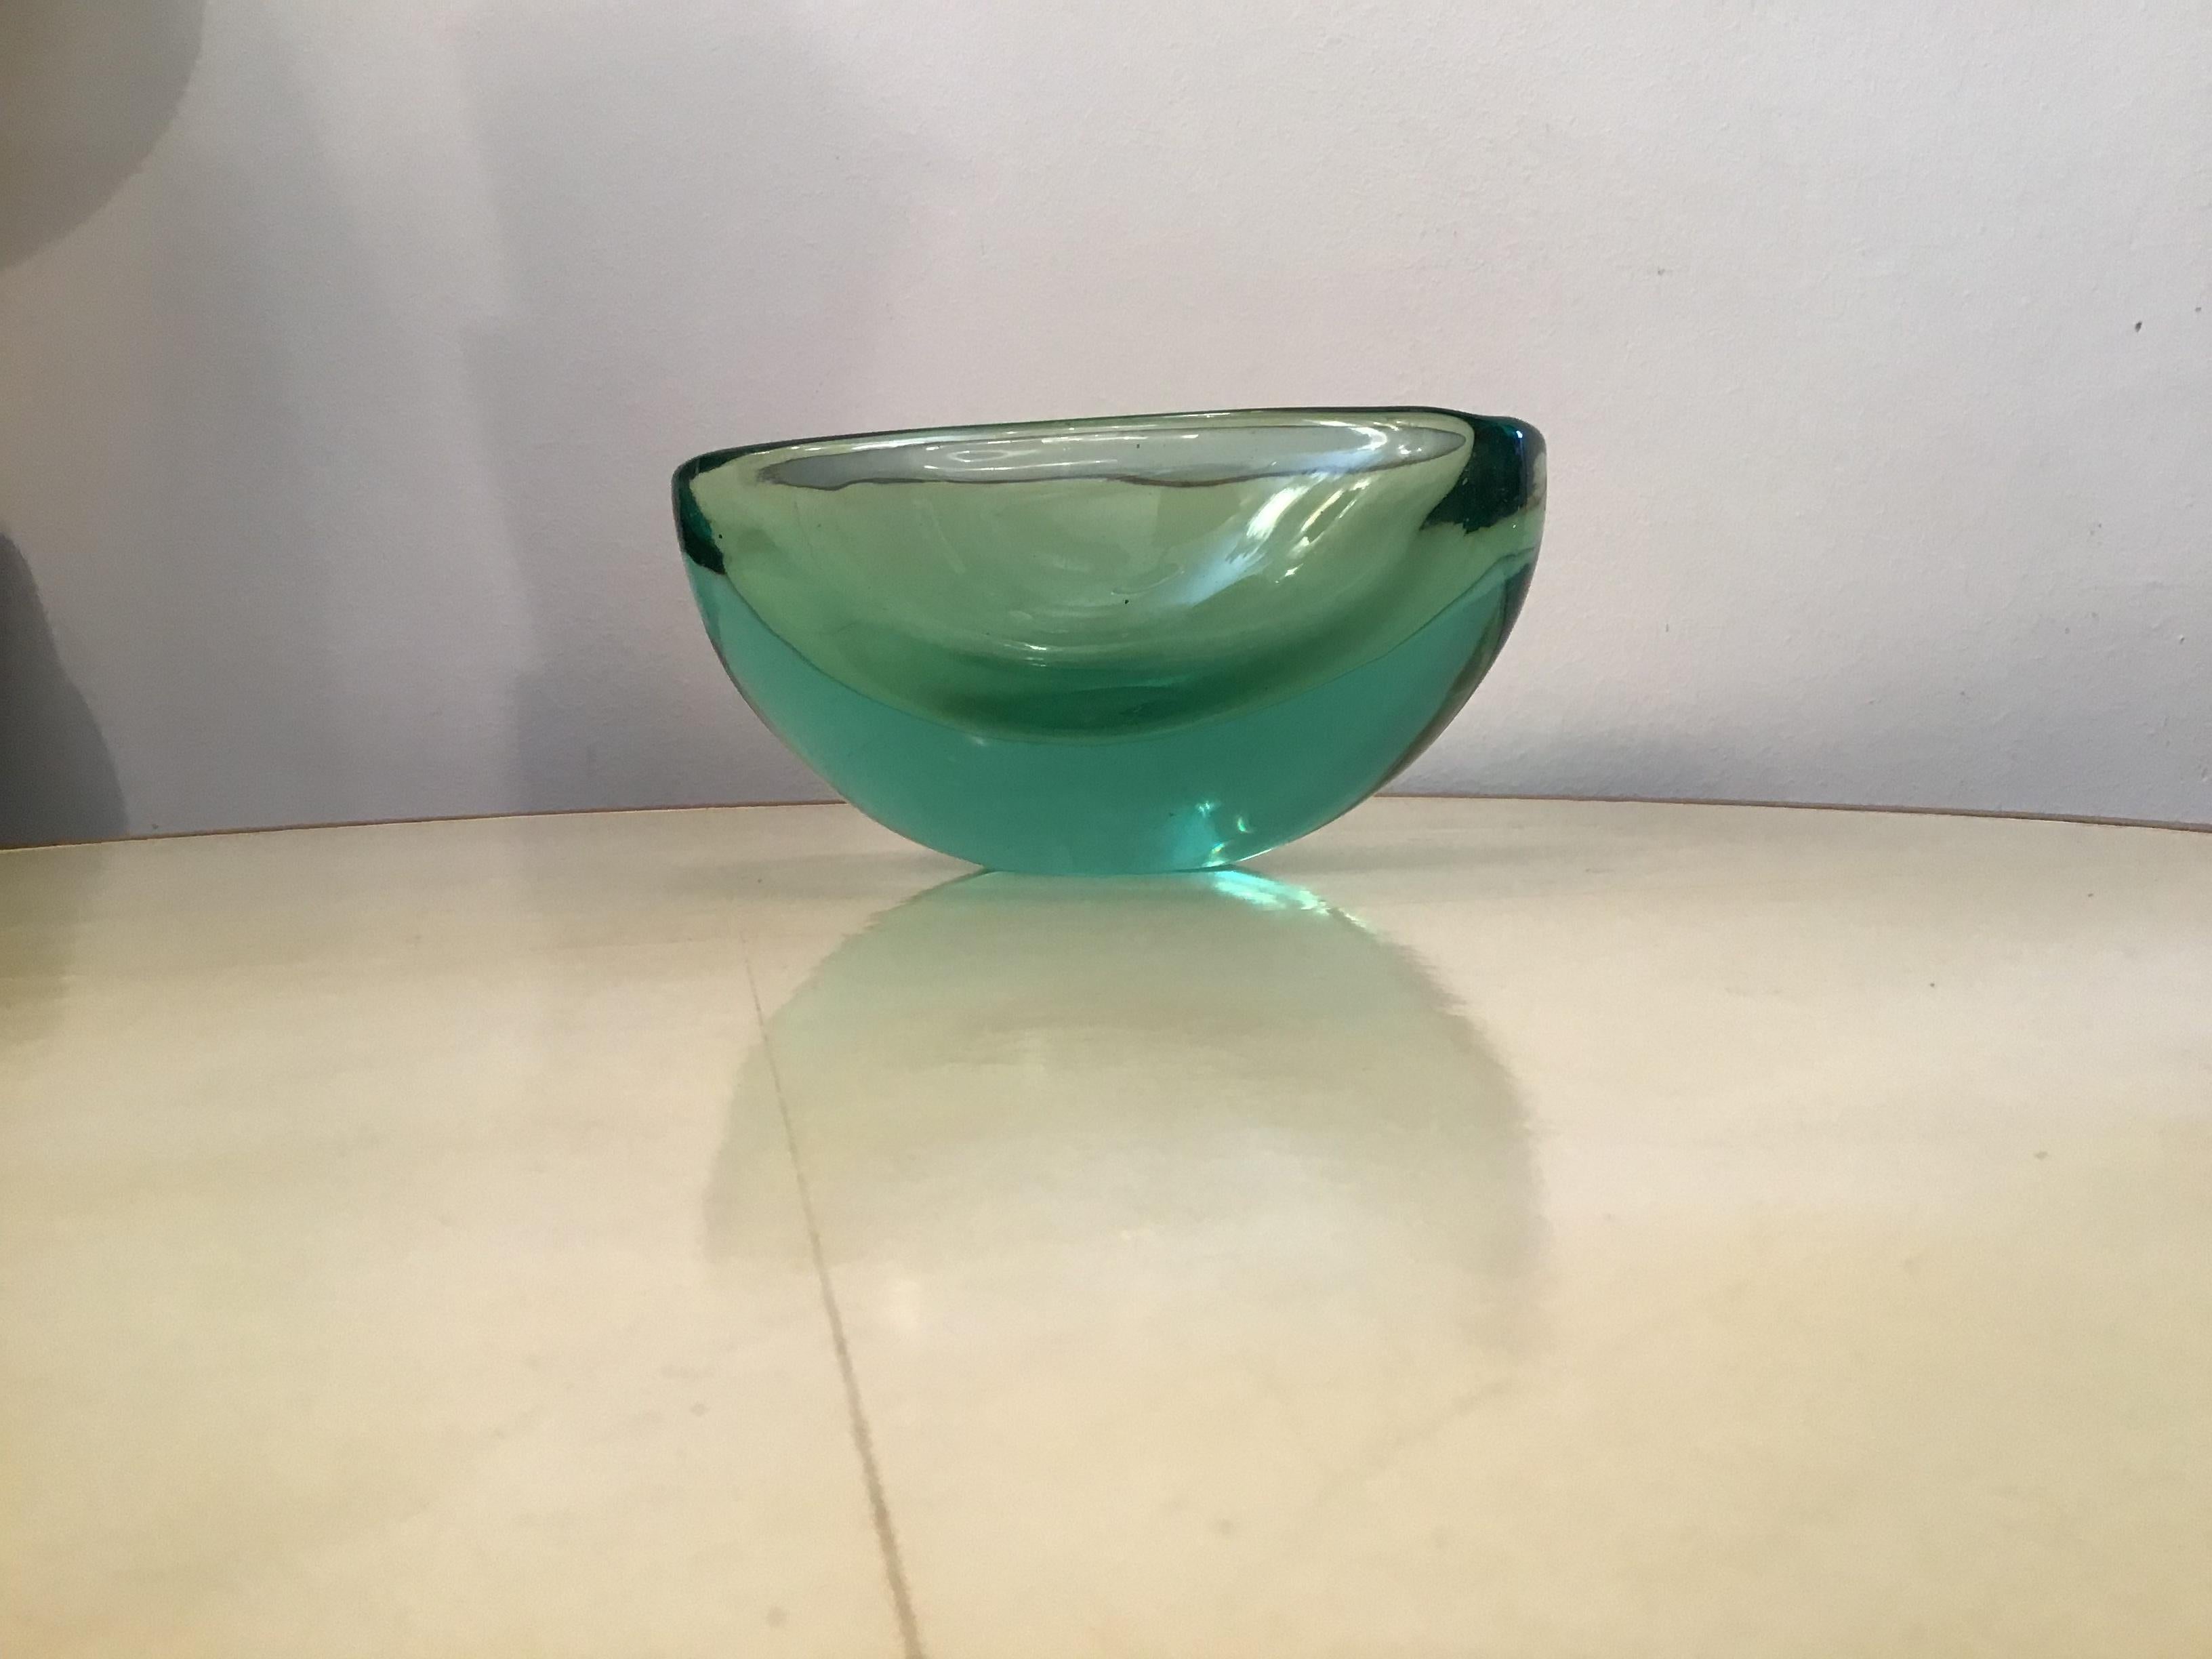 Other Archimede Seguso Oval Bowl, Green Submerged Glass Centrepiece, 1950 For Sale